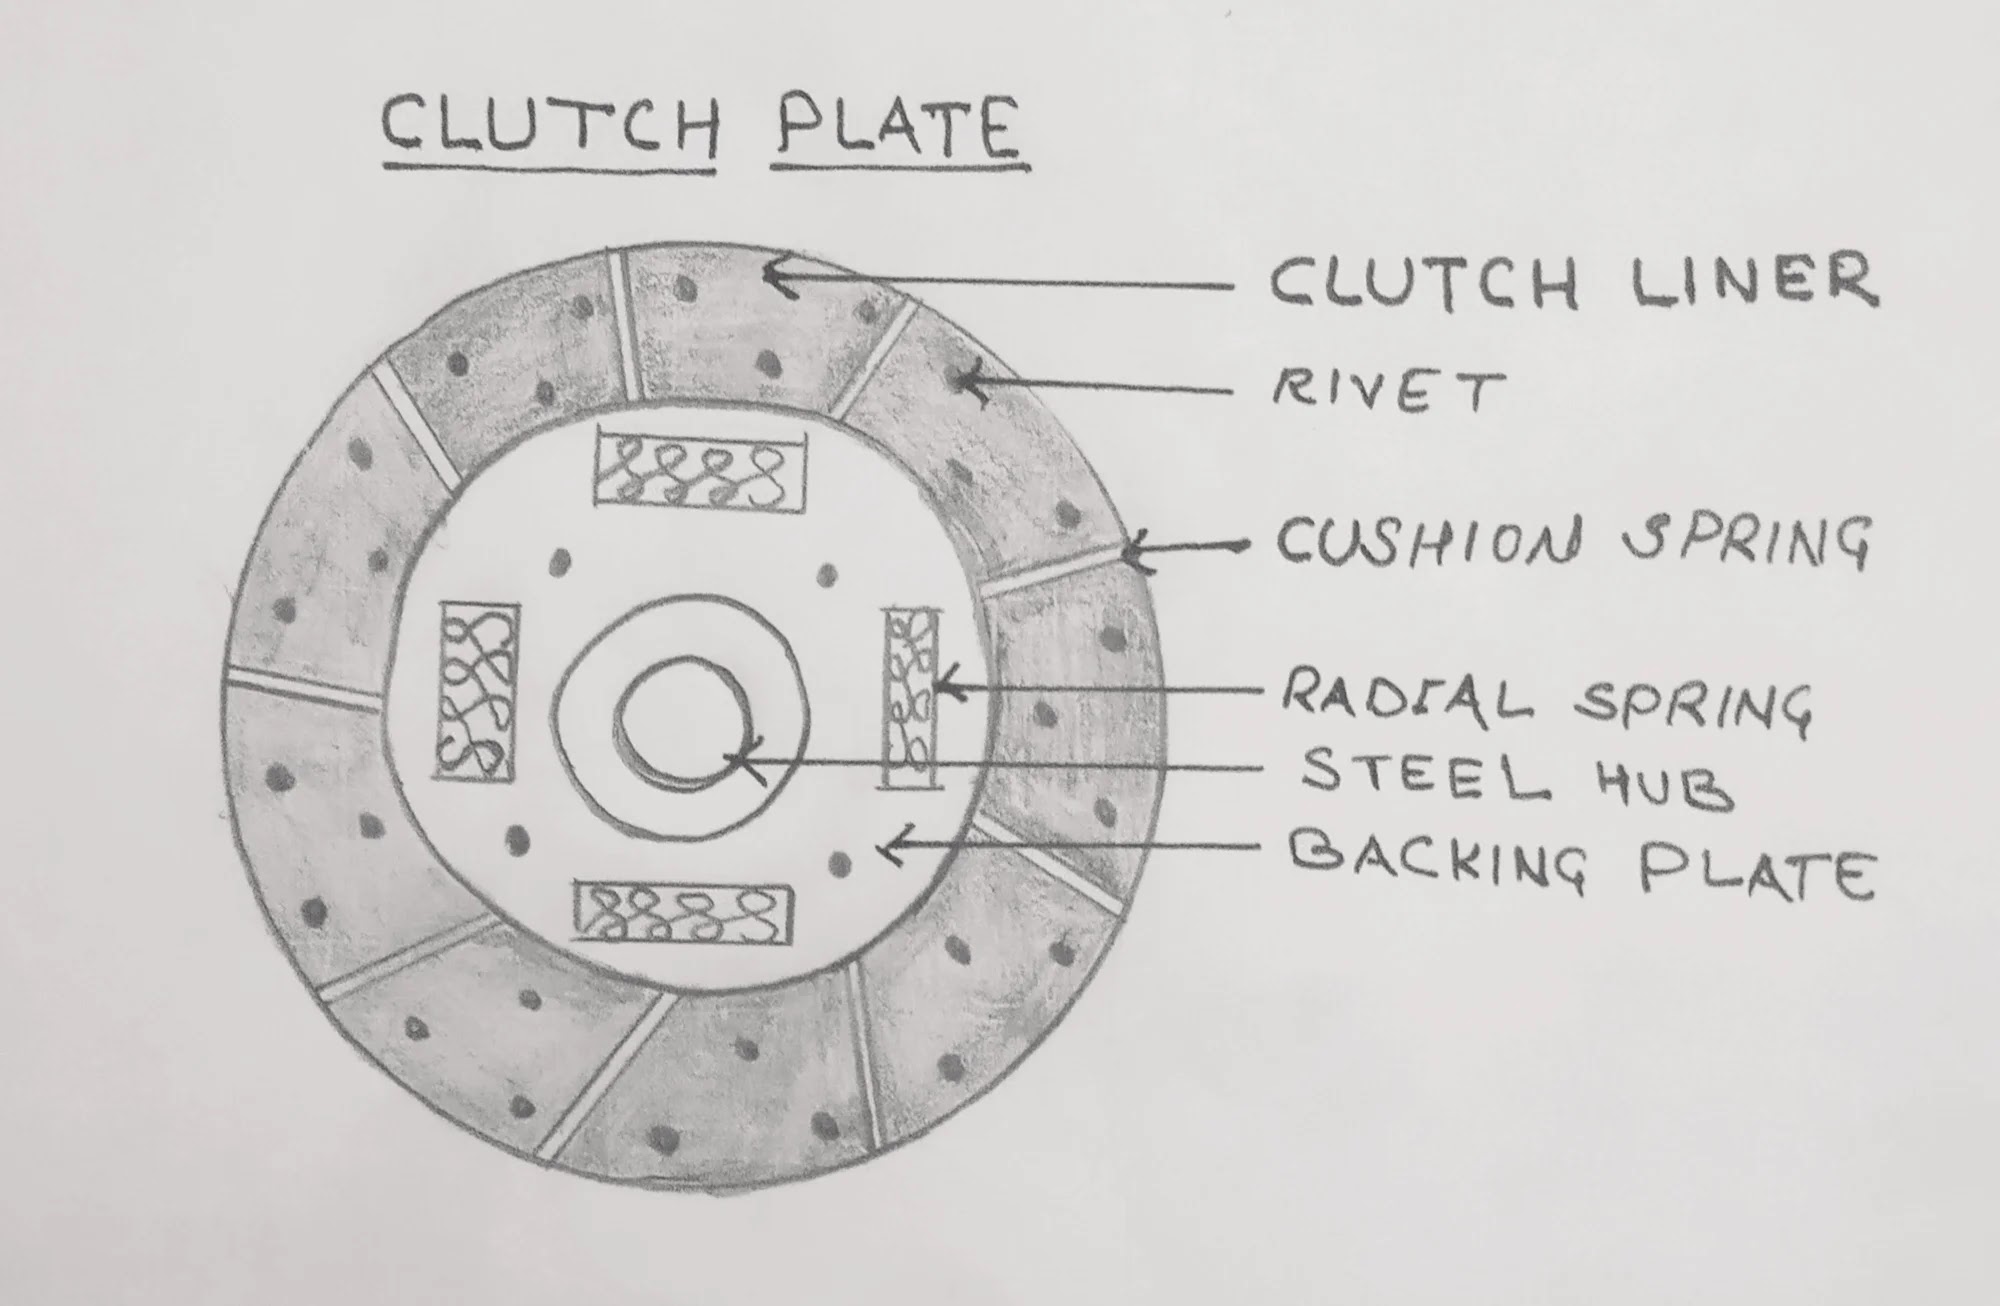 Clutch  Tamil Meaning of Clutch